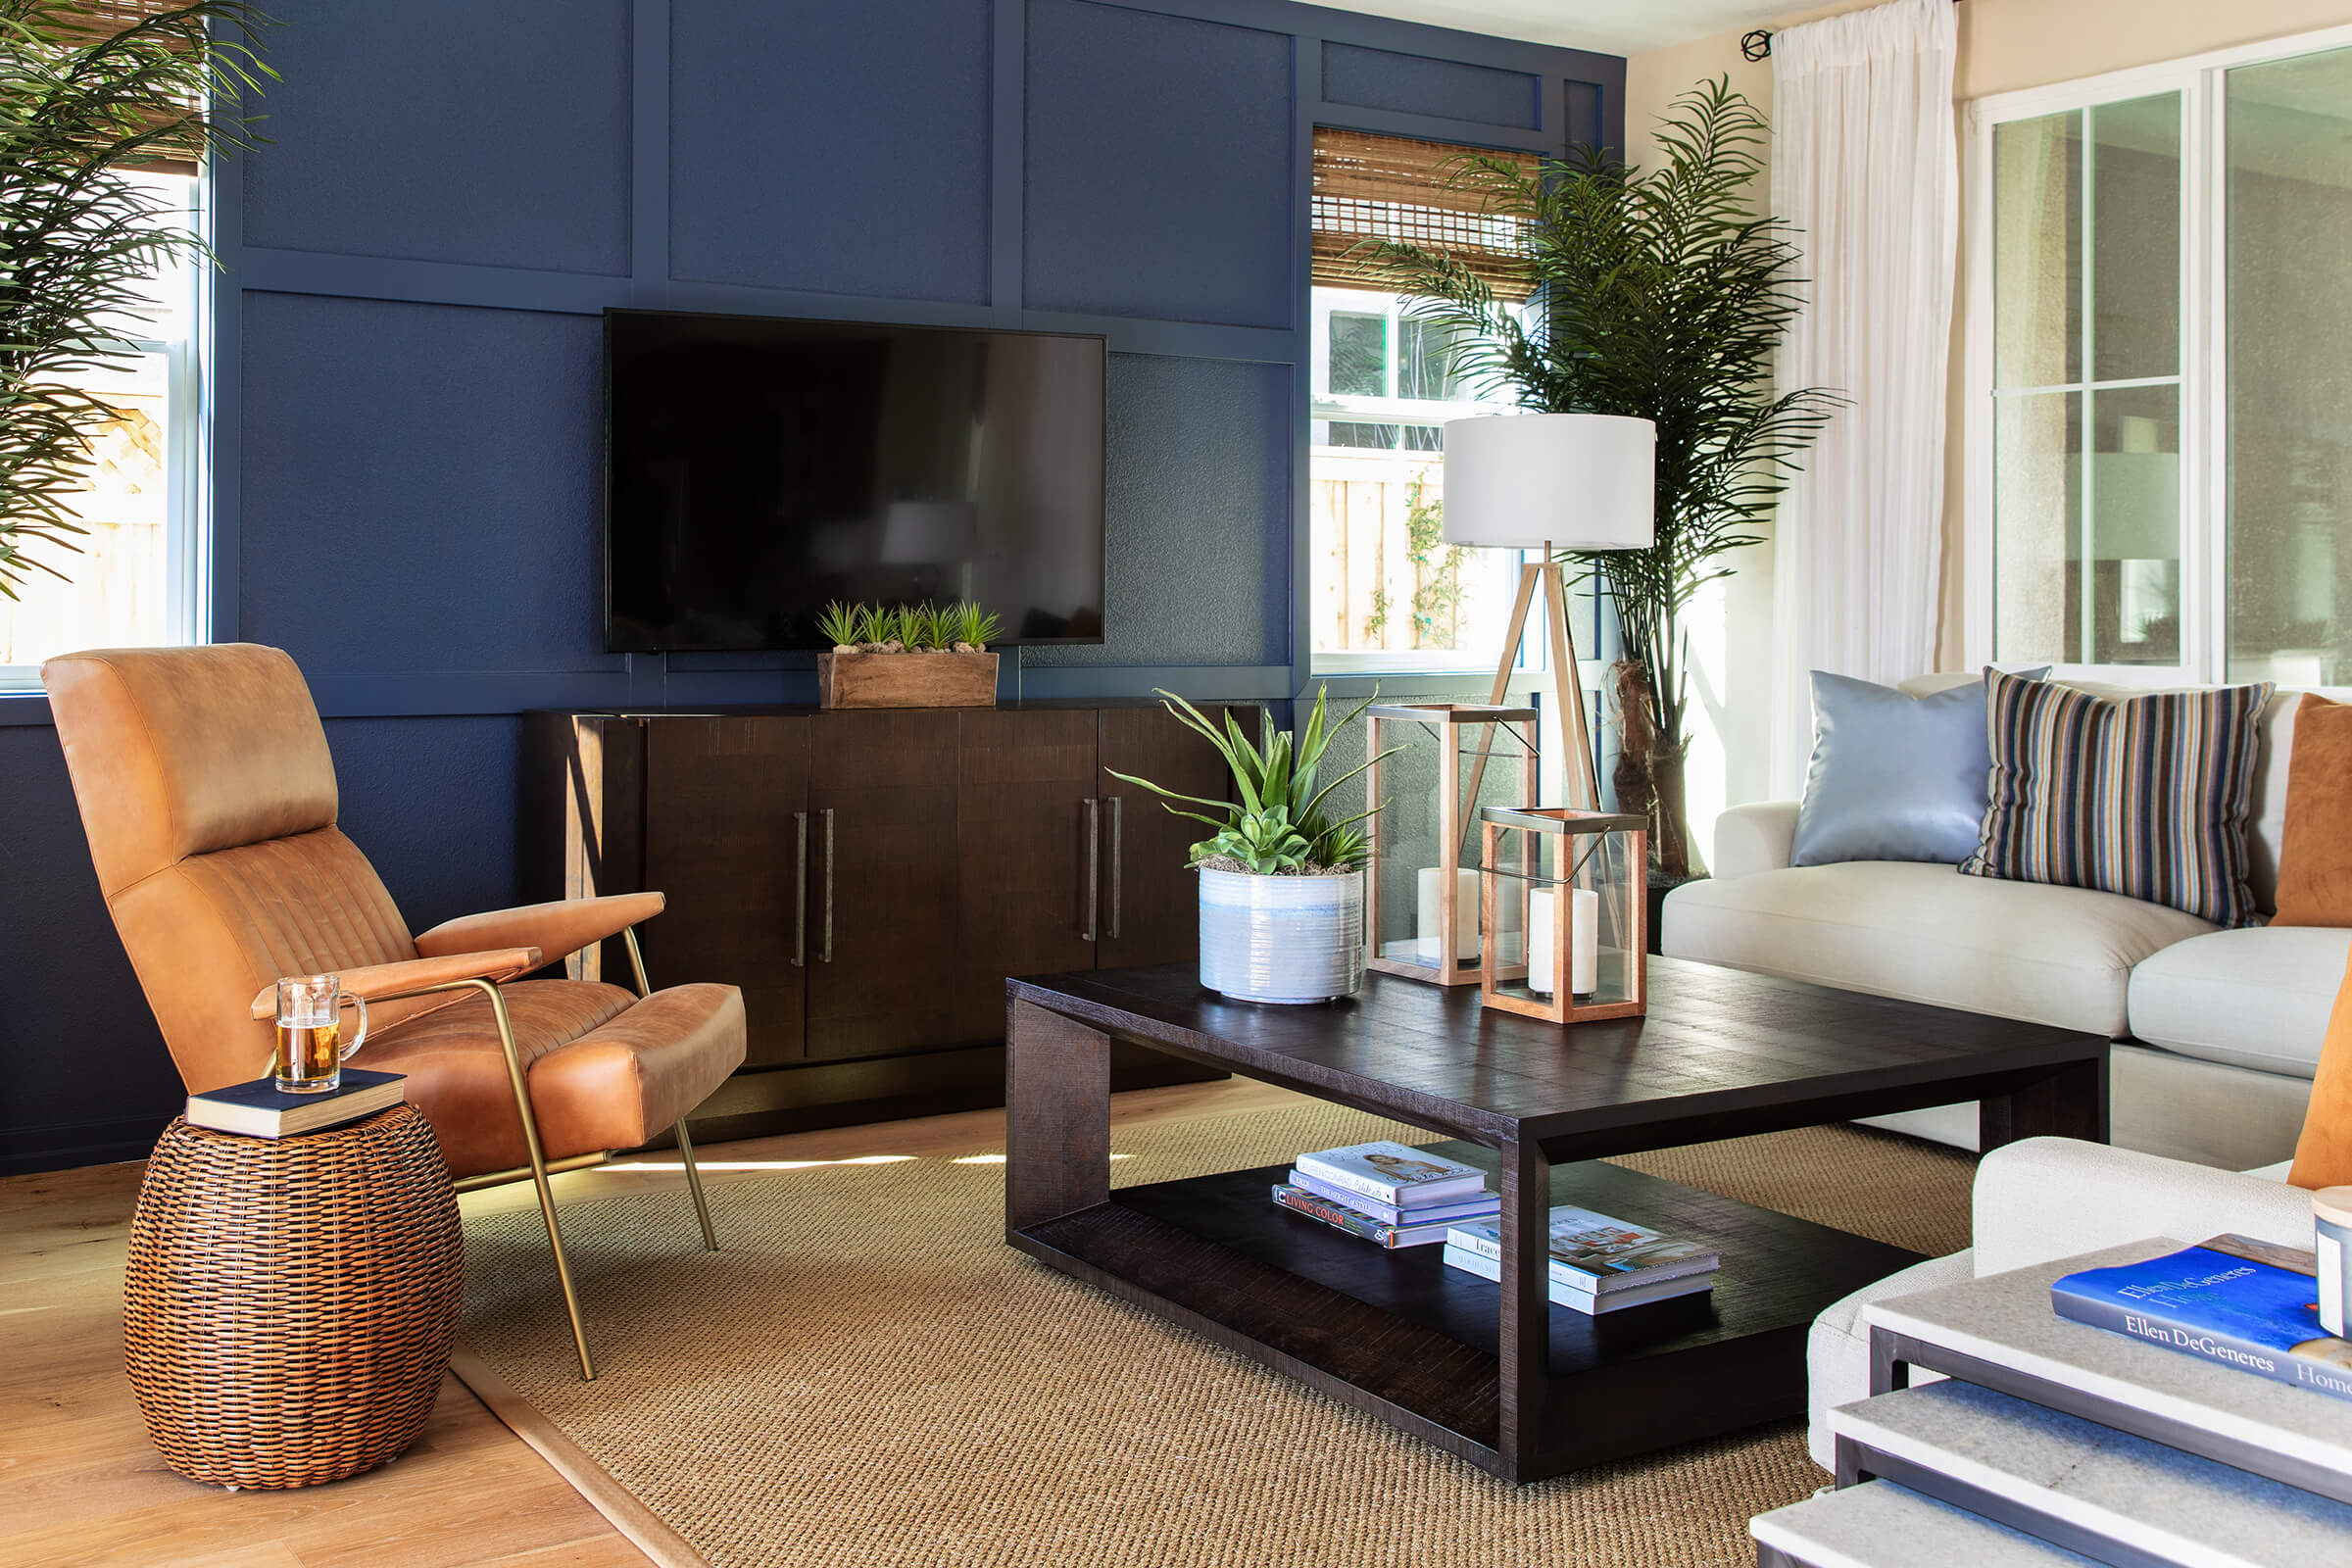 Modern Versatility study room with accented blue wall, tan leather couch and accenting decor.